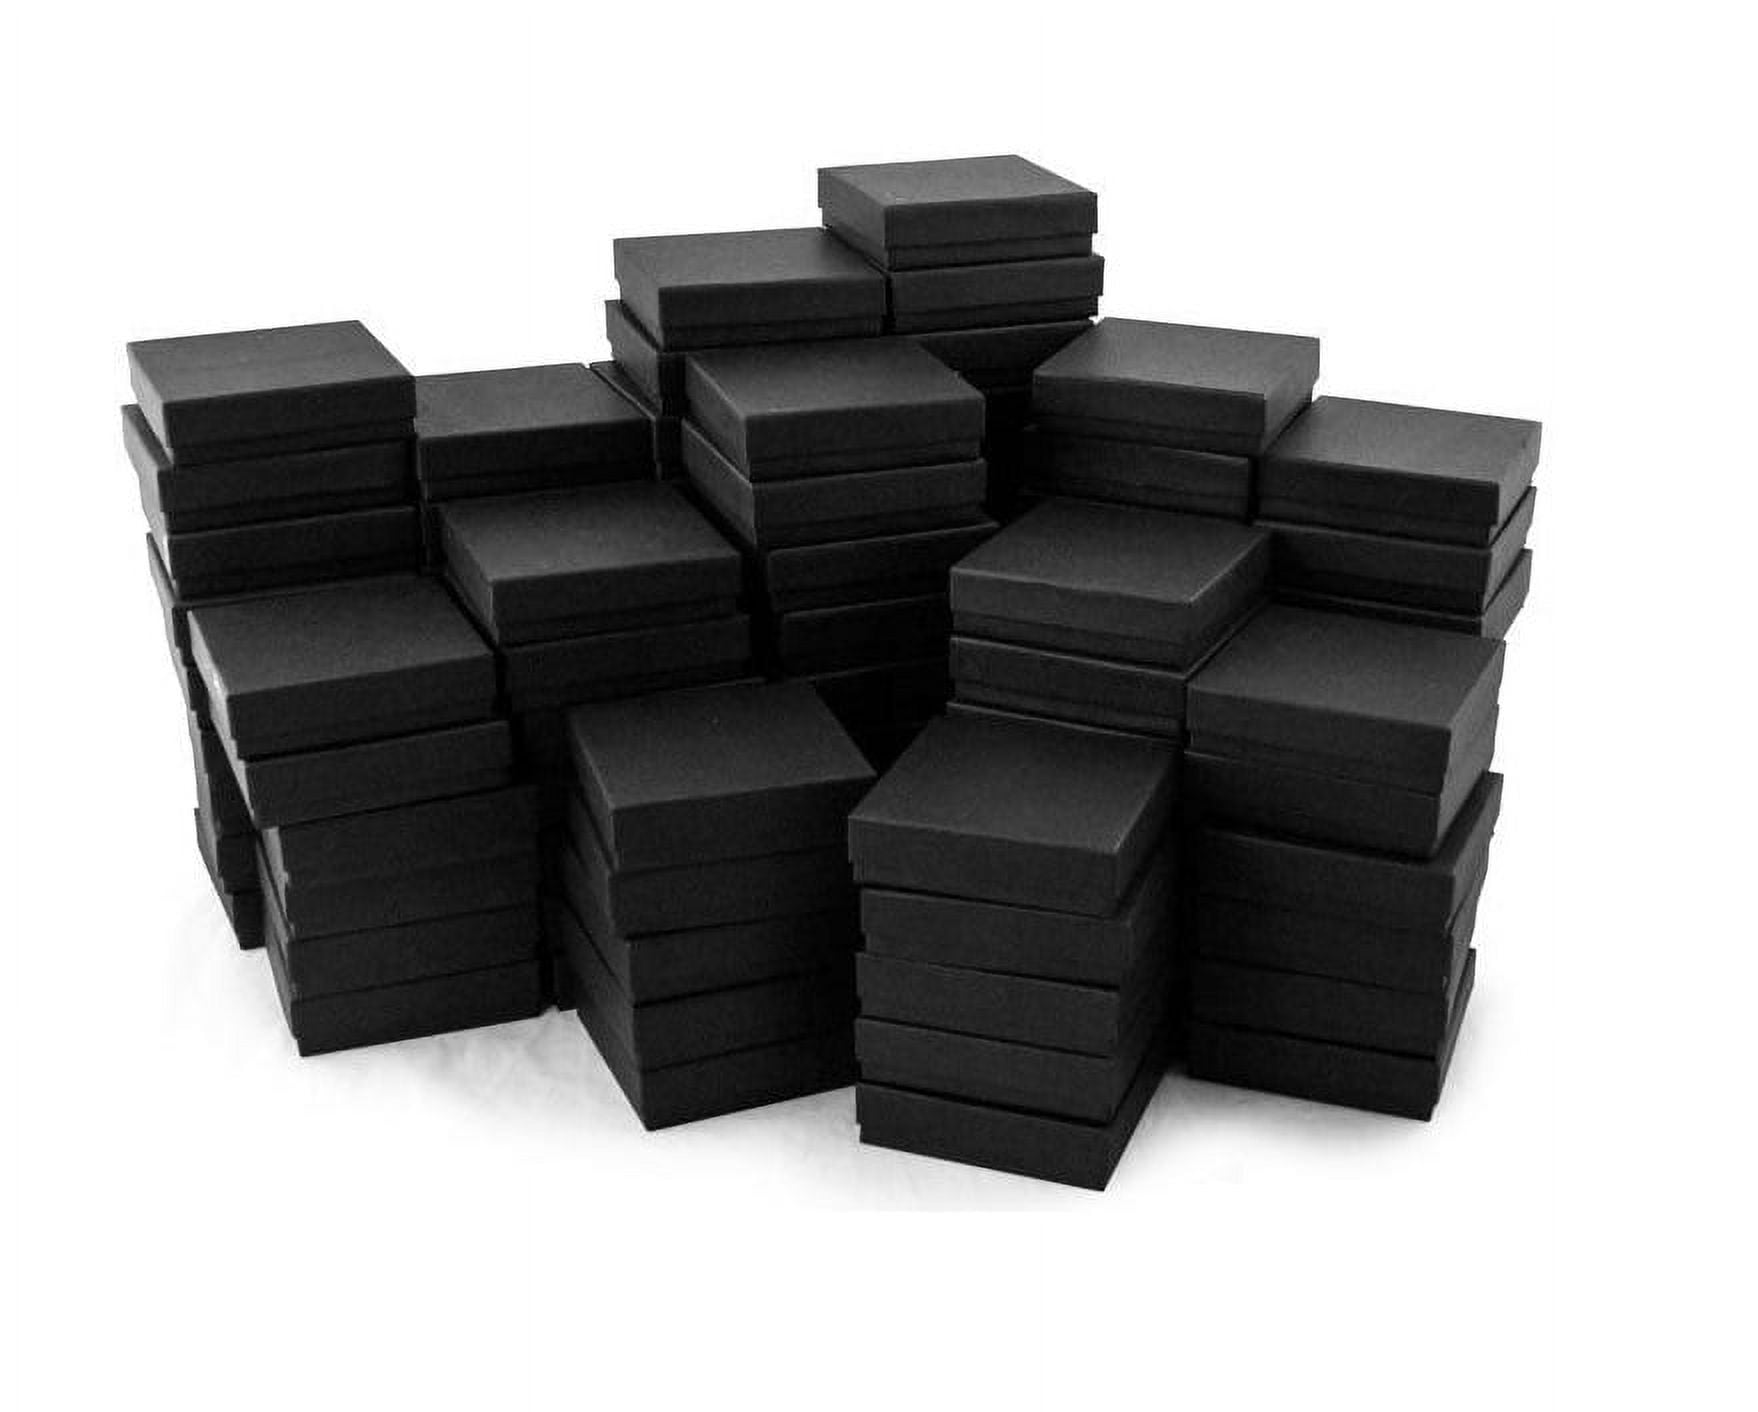 6 Pack, Black Matte Jewelry Gift Boxes, 7x5x1.25, Fiber Fill for